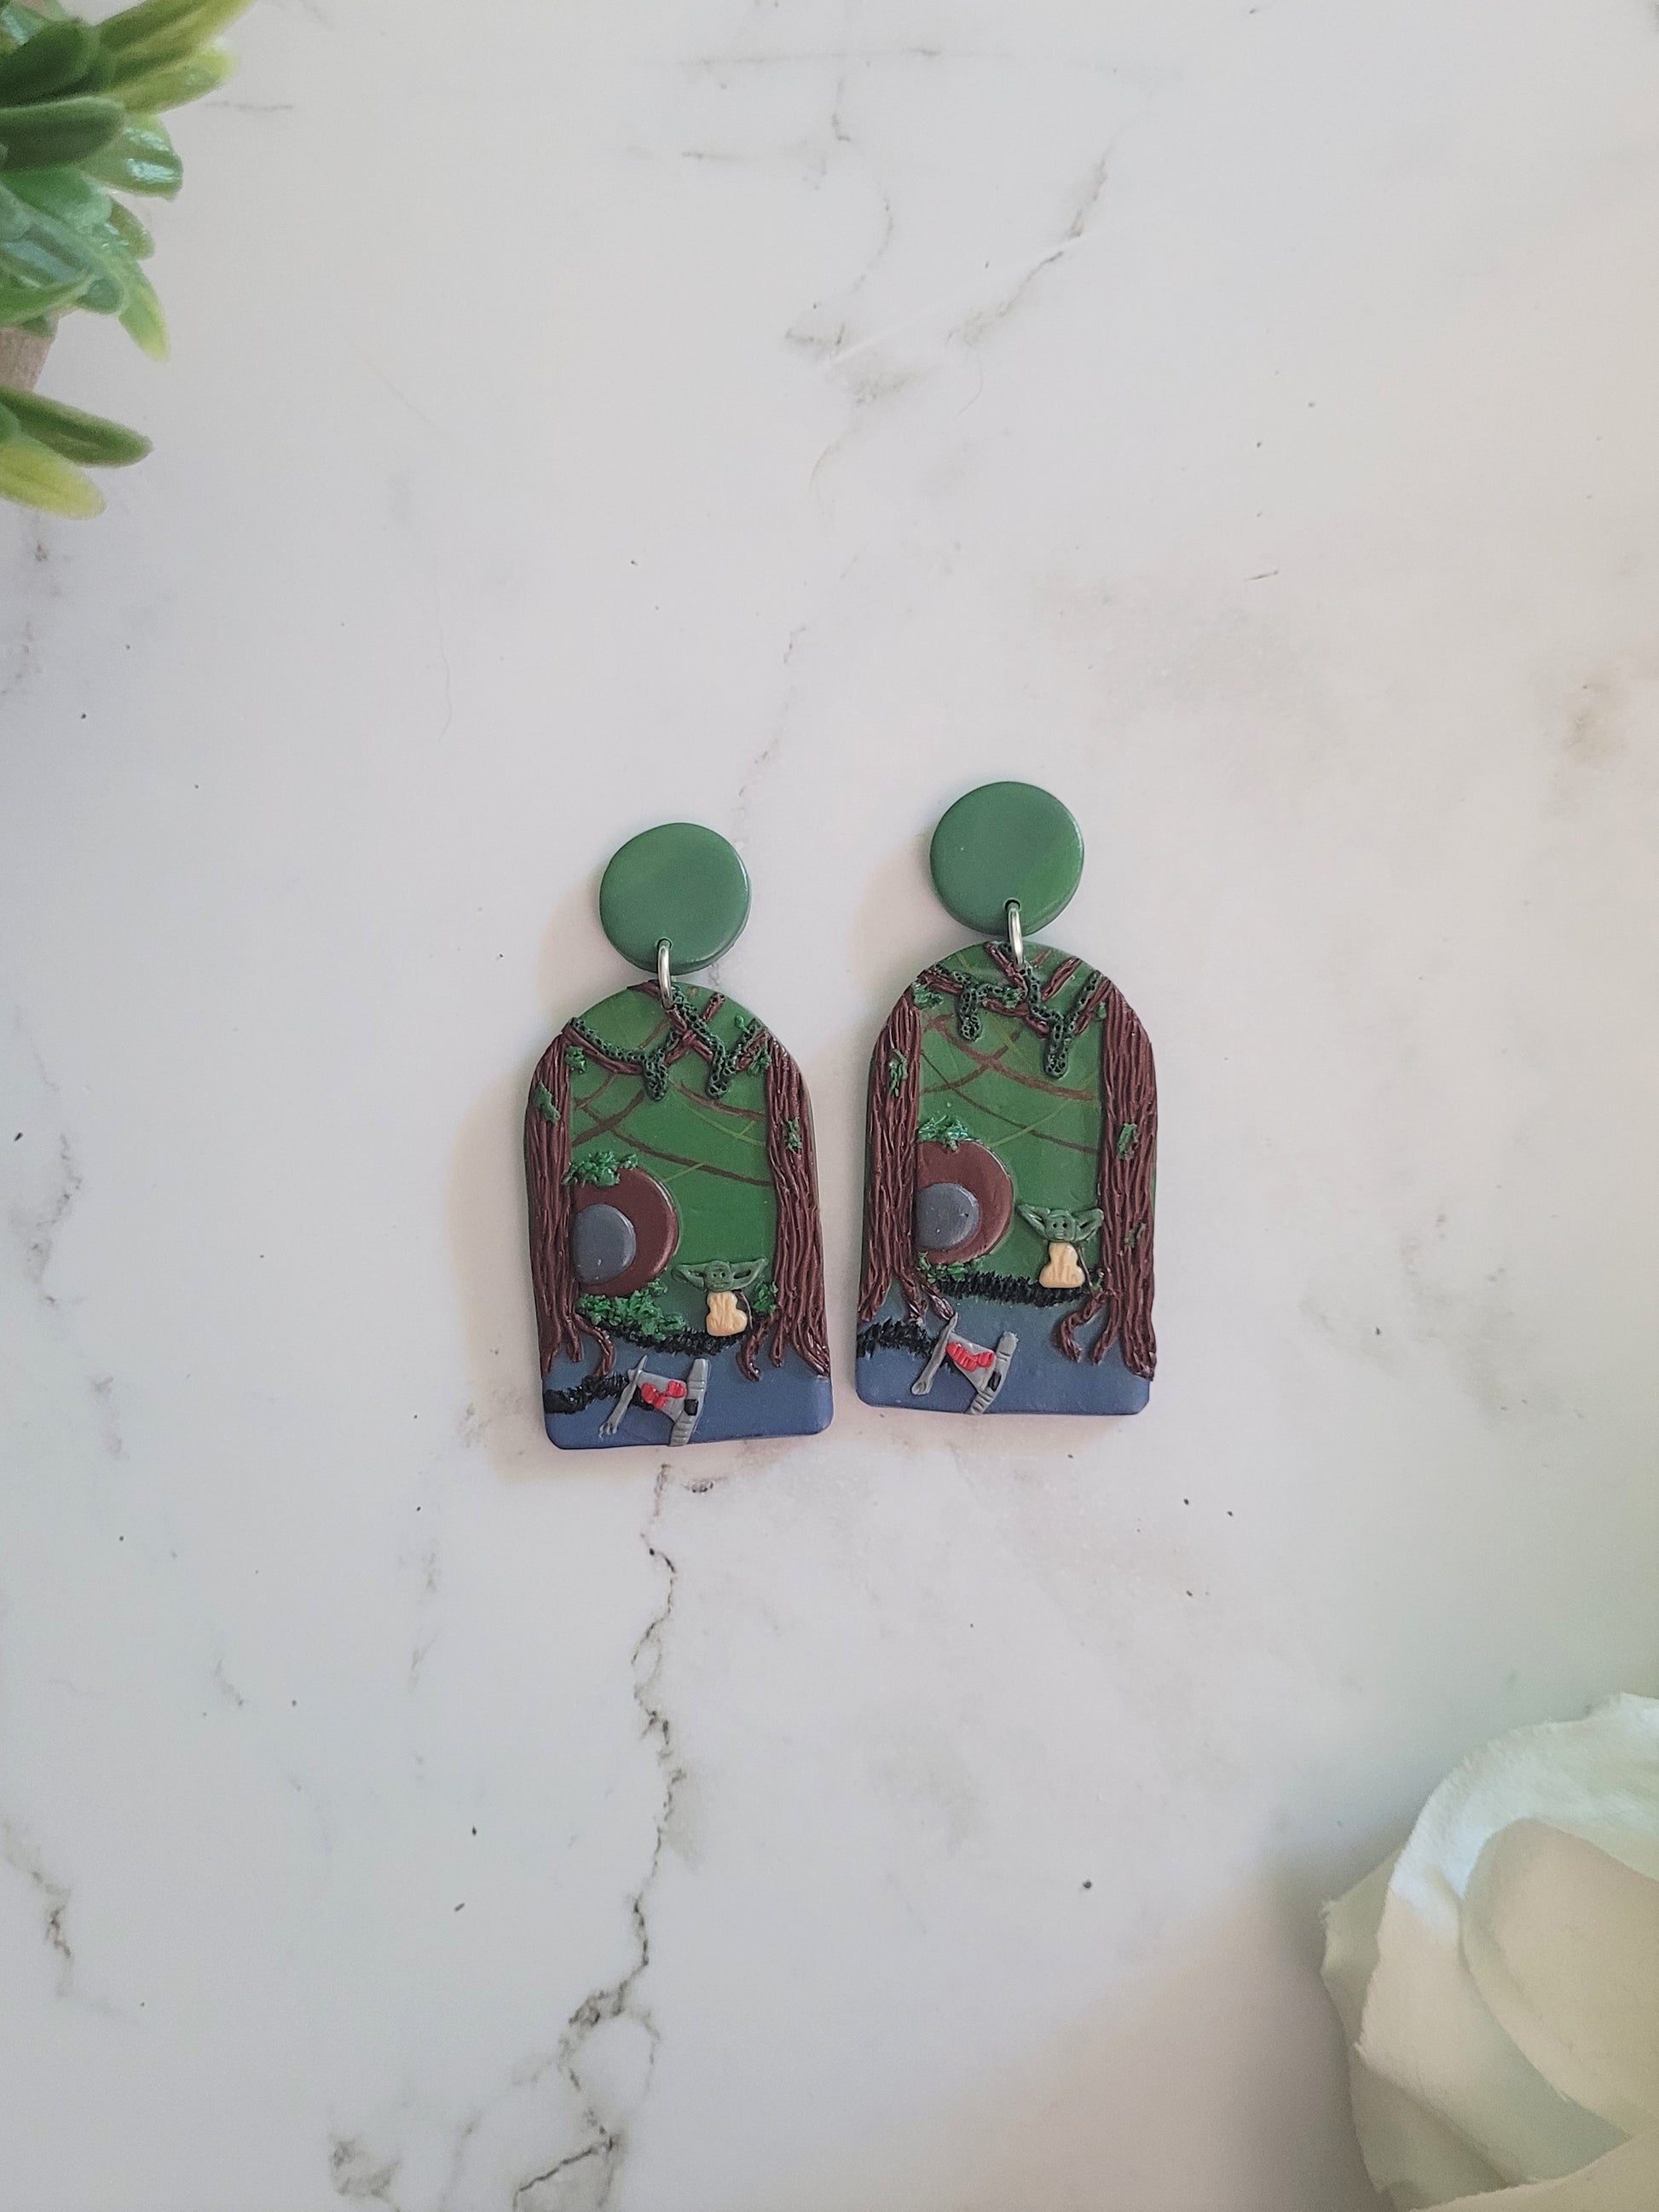 Arch earrings with a swamp landscape